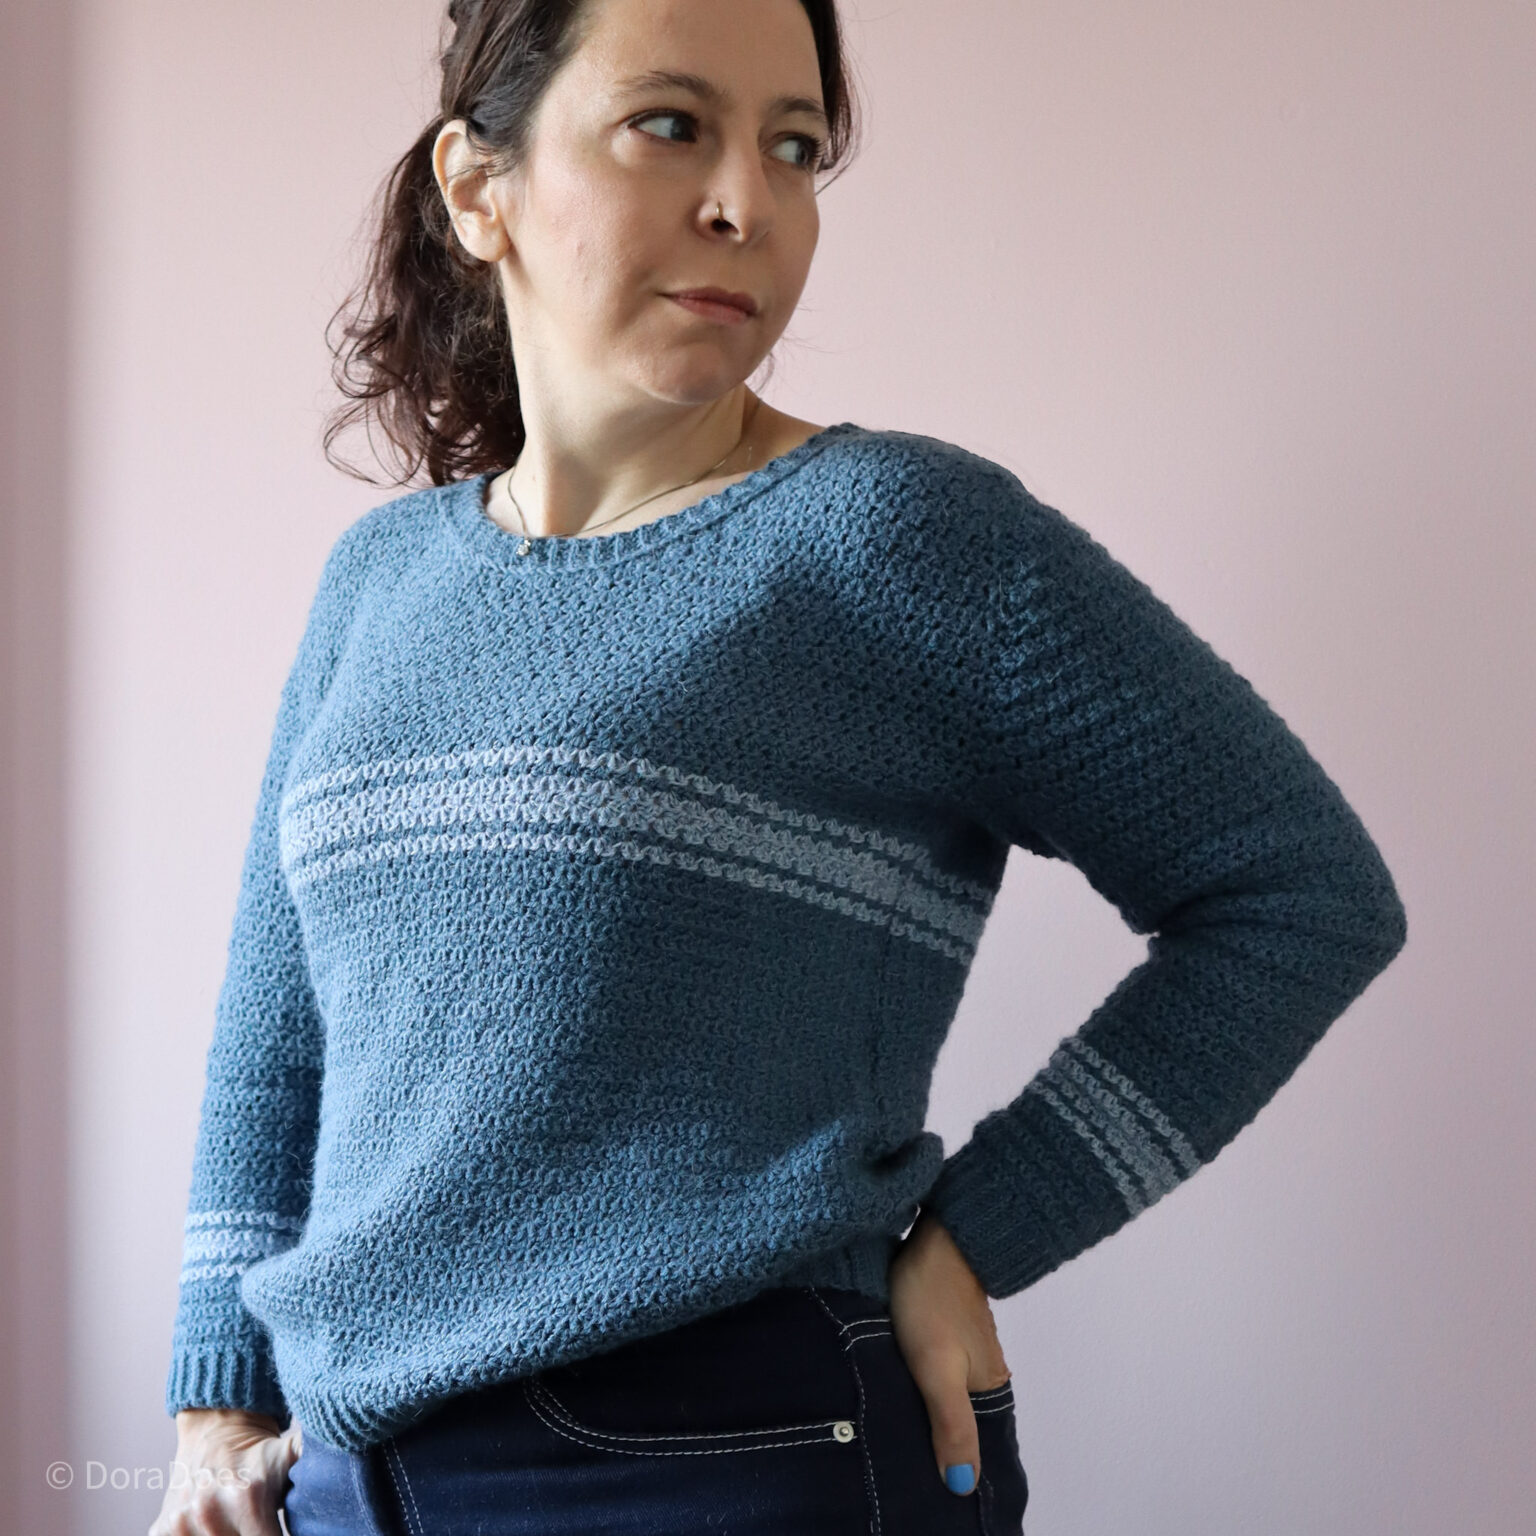 A woman wearing a blue crochet sweater with pale stripes across the chest and long sleeves stands looking to the side, hand resting on hip.